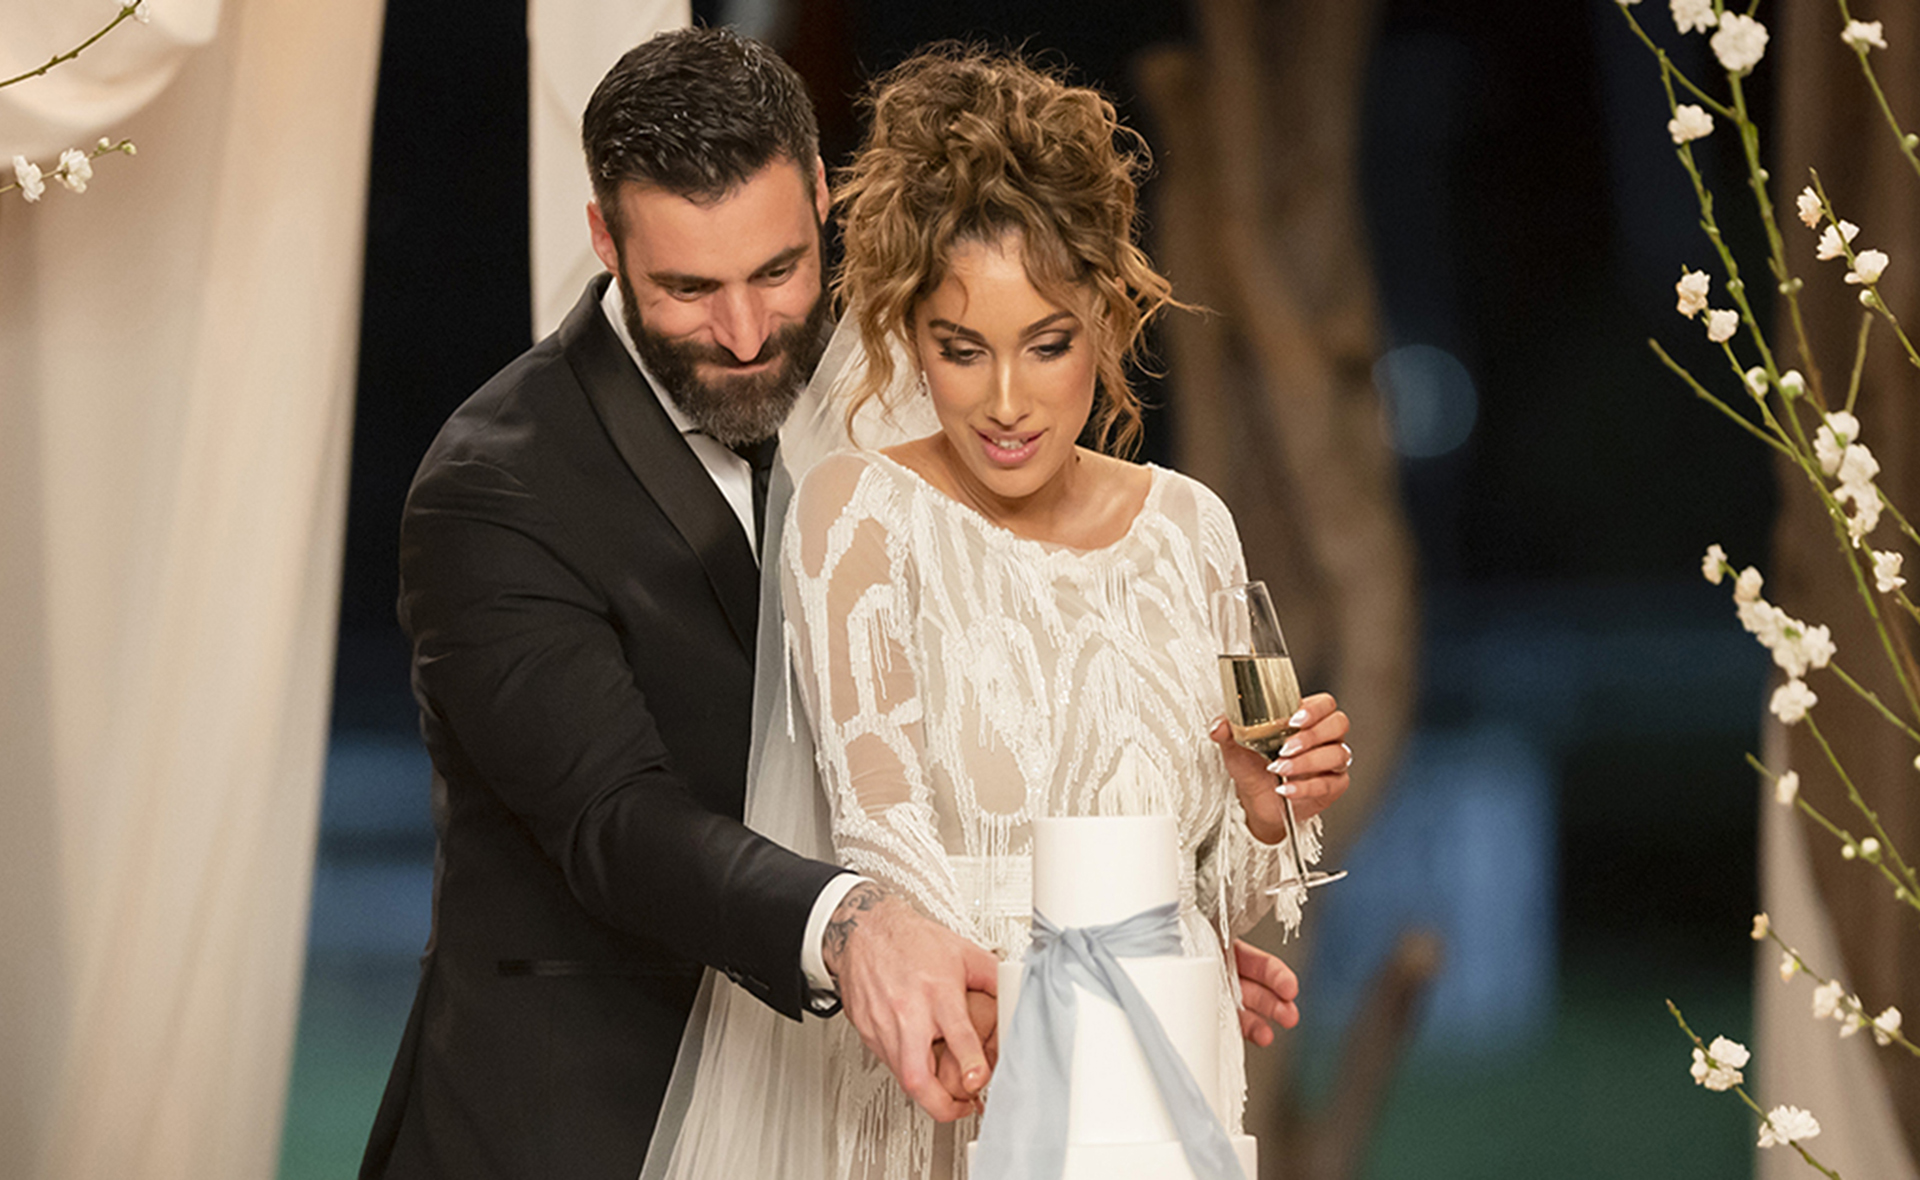 Selin and Anthony’s relationship on Married At First Sight teaches us why “nice” guys finish last